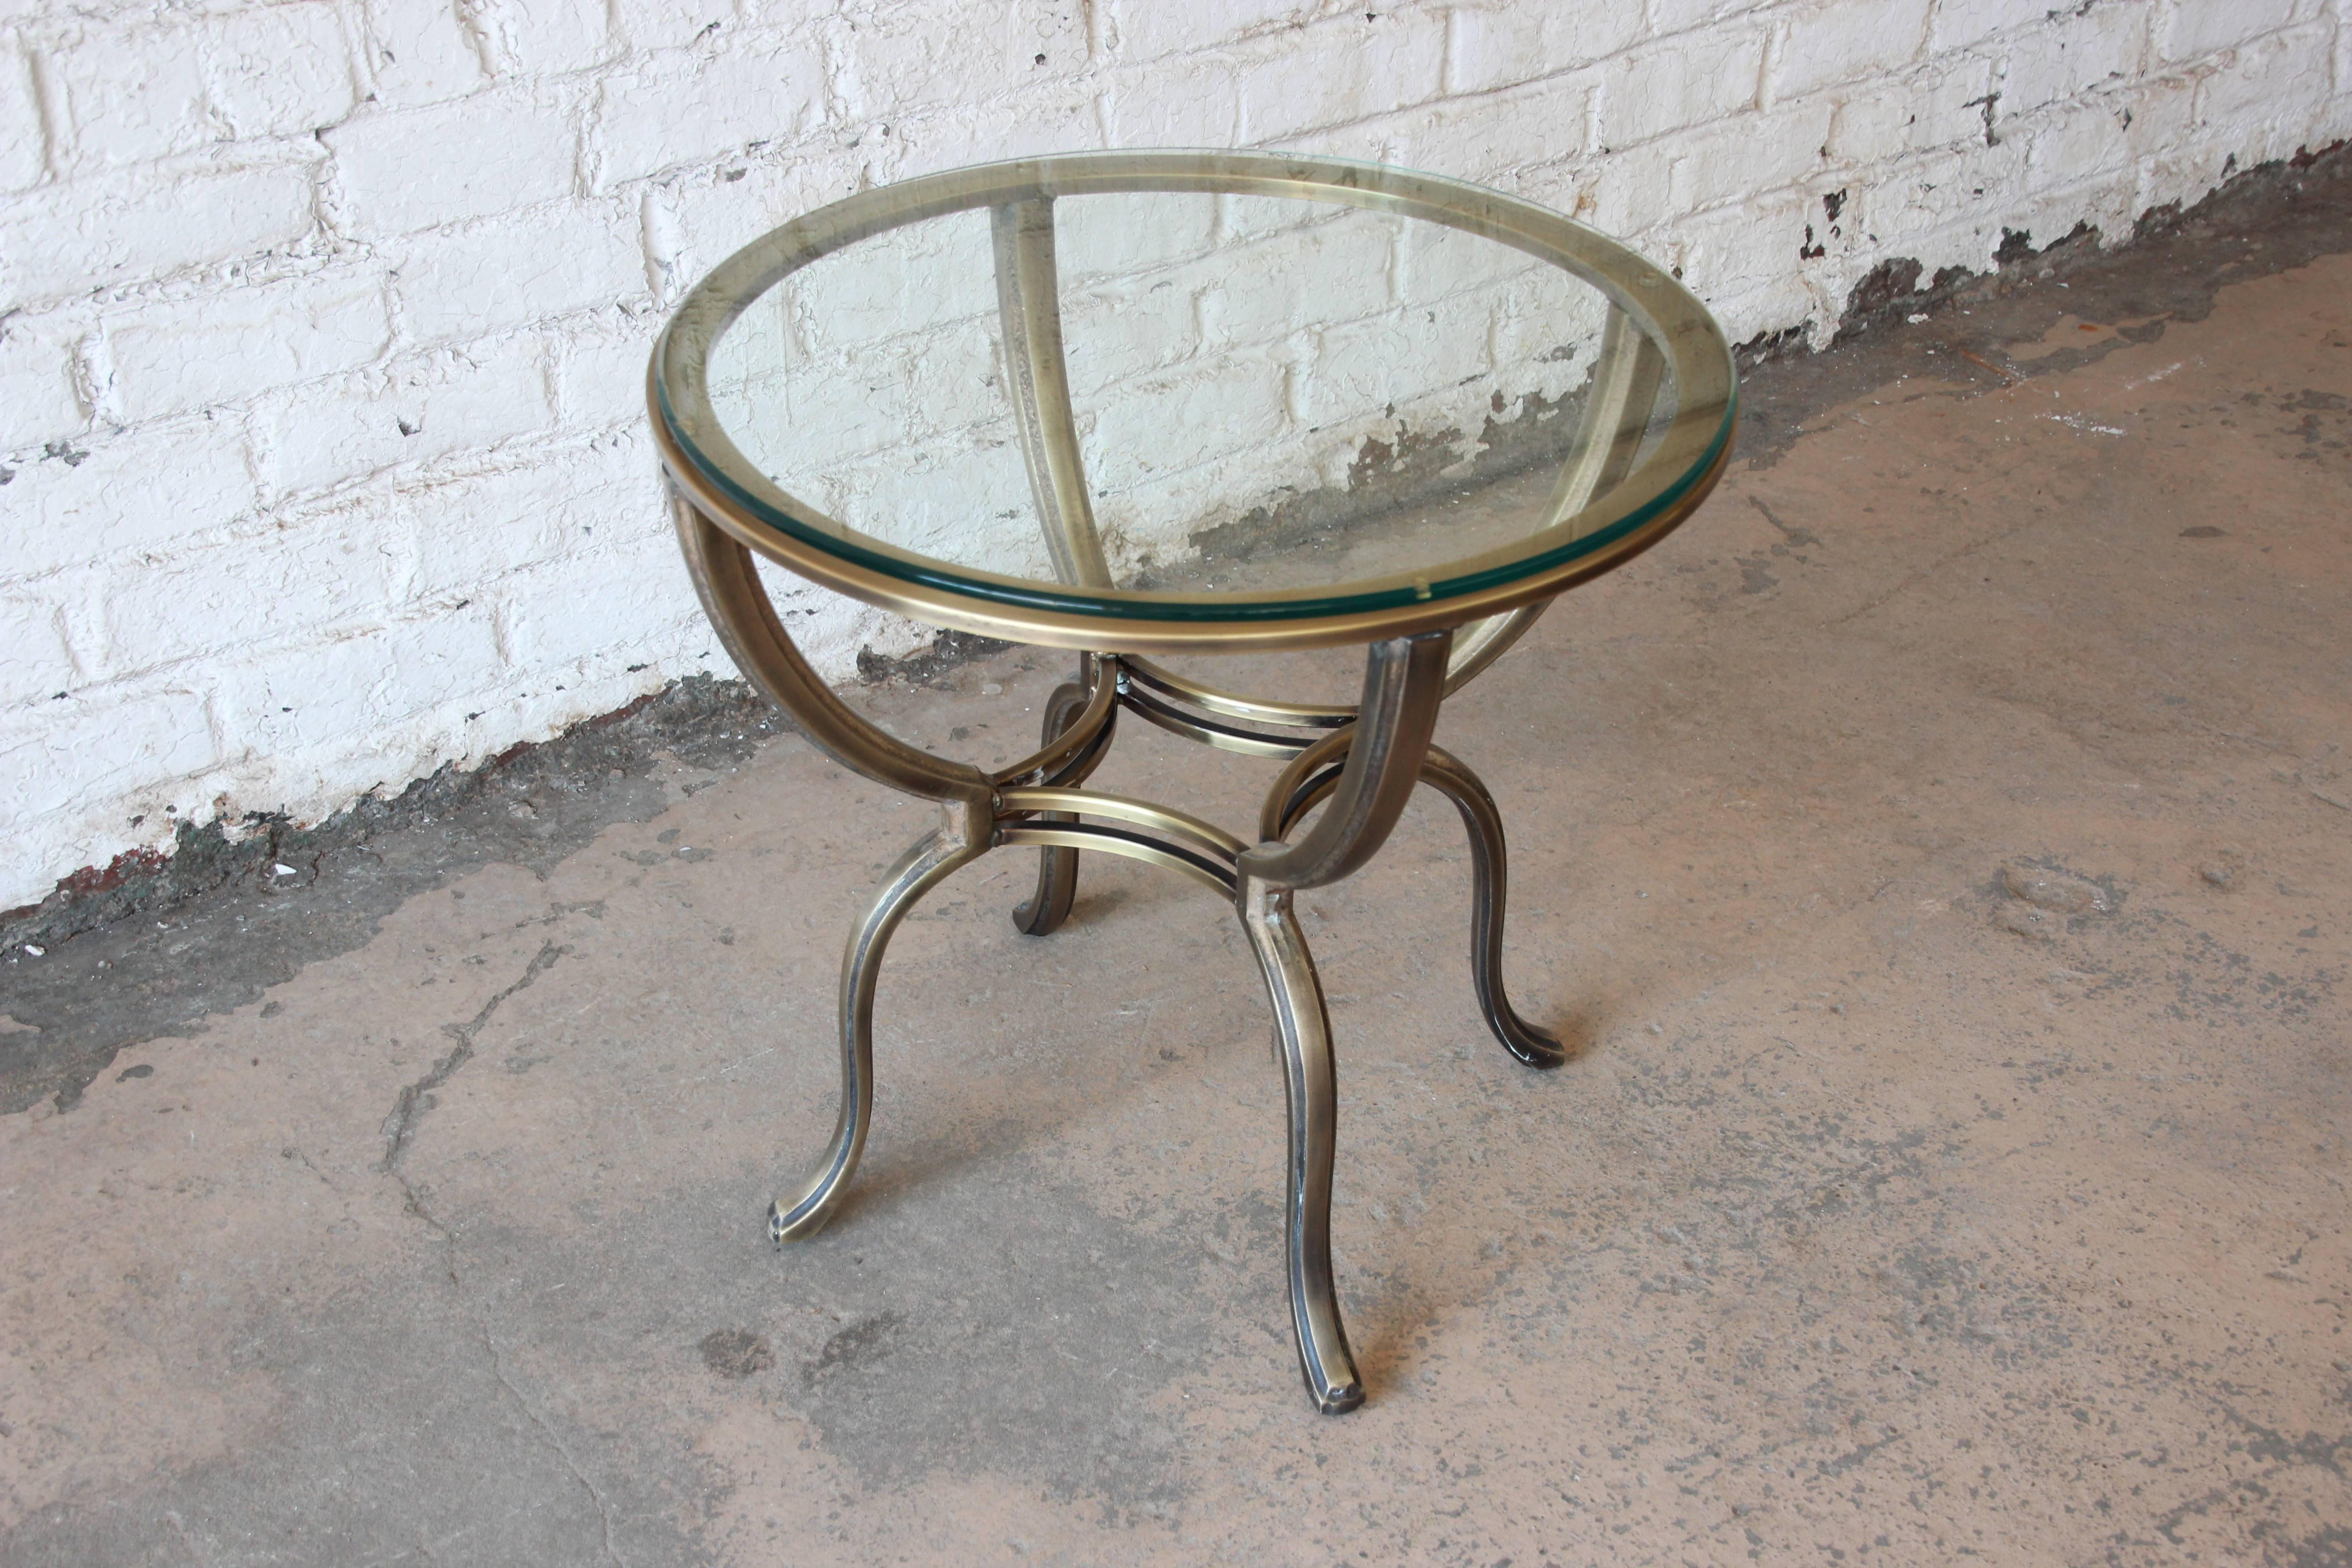 Beautiful solid brass round side table by Mastercraft. The table has a round bevelled edge glass top that sits upon four arms that form and elegant design. This piece is excellent vintage condition.